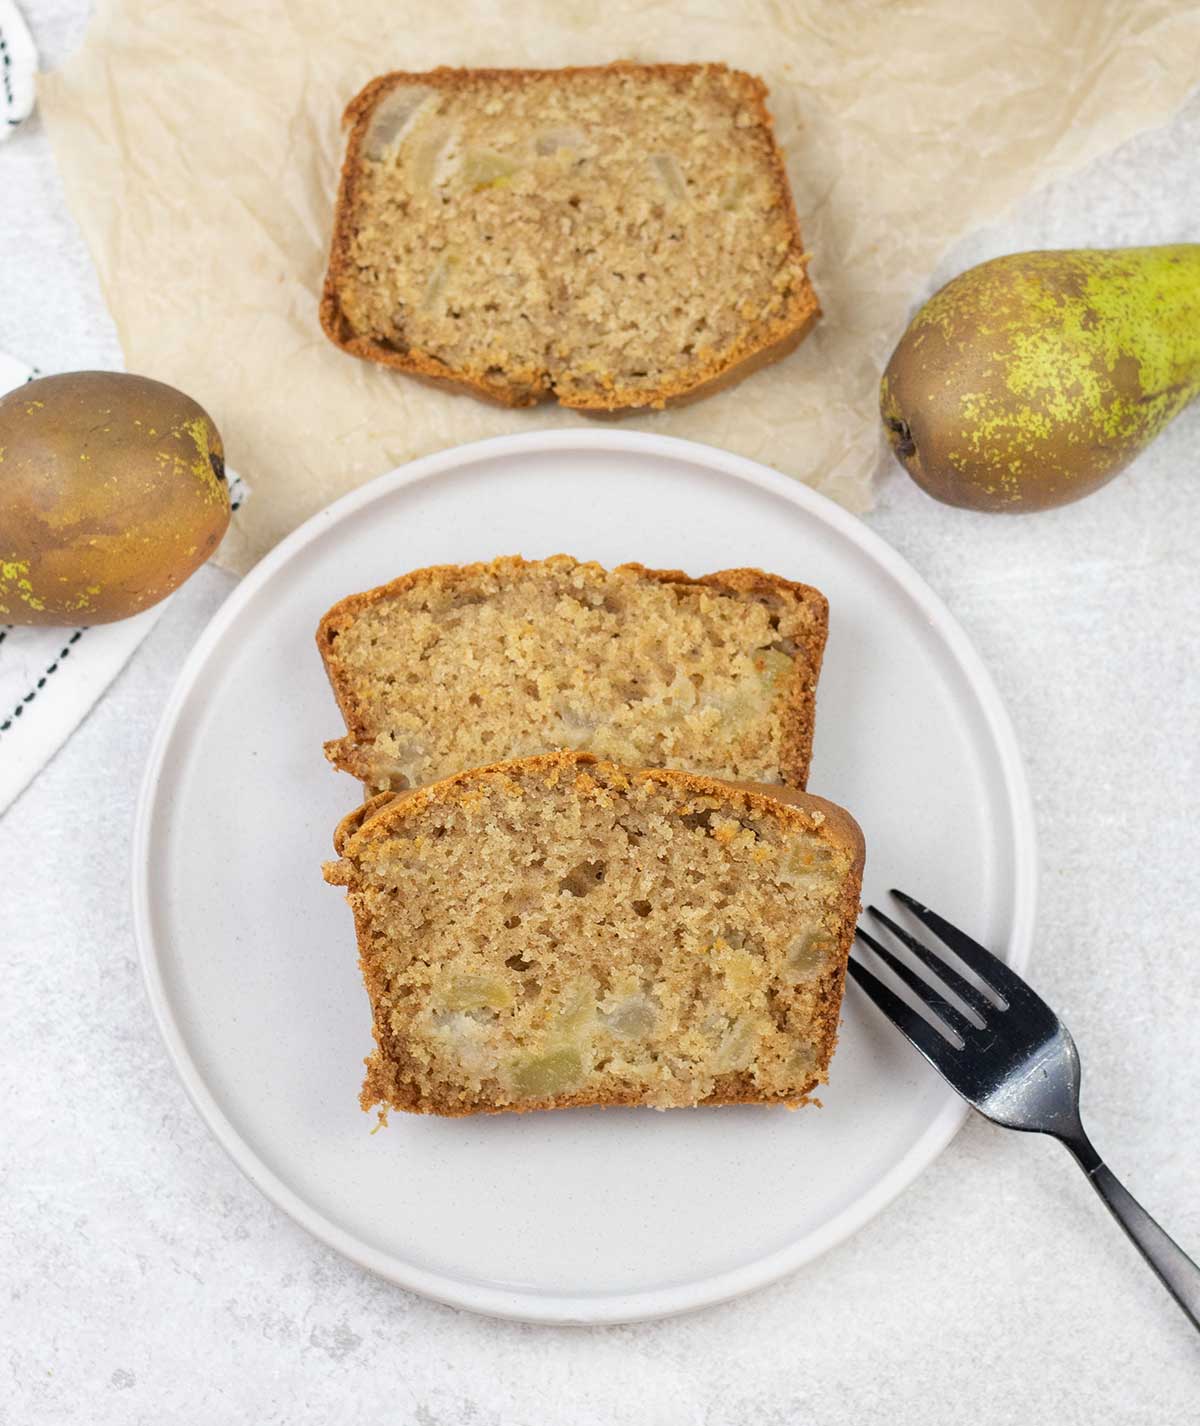 Pear Bread slices and some pears around it